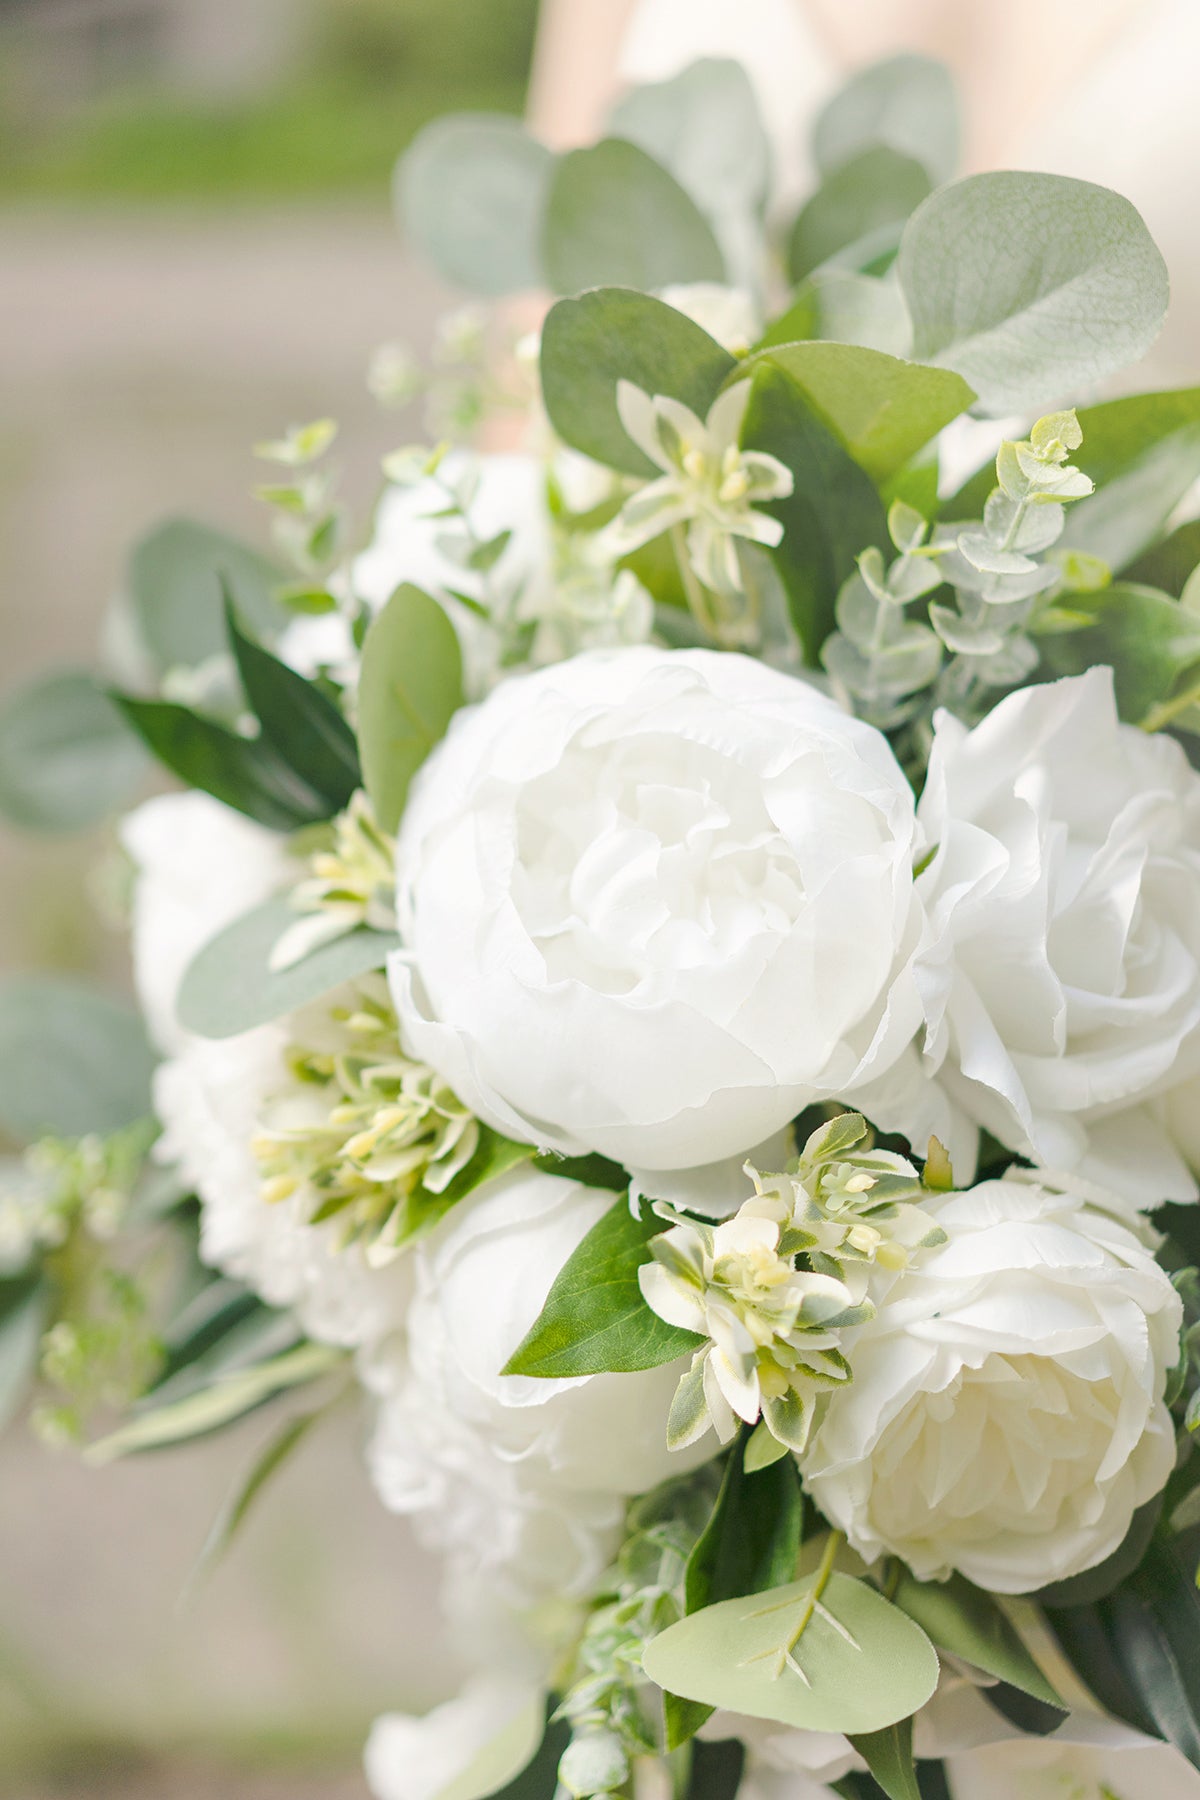 Small Cascade Bridal Bouquet in Natural Whites